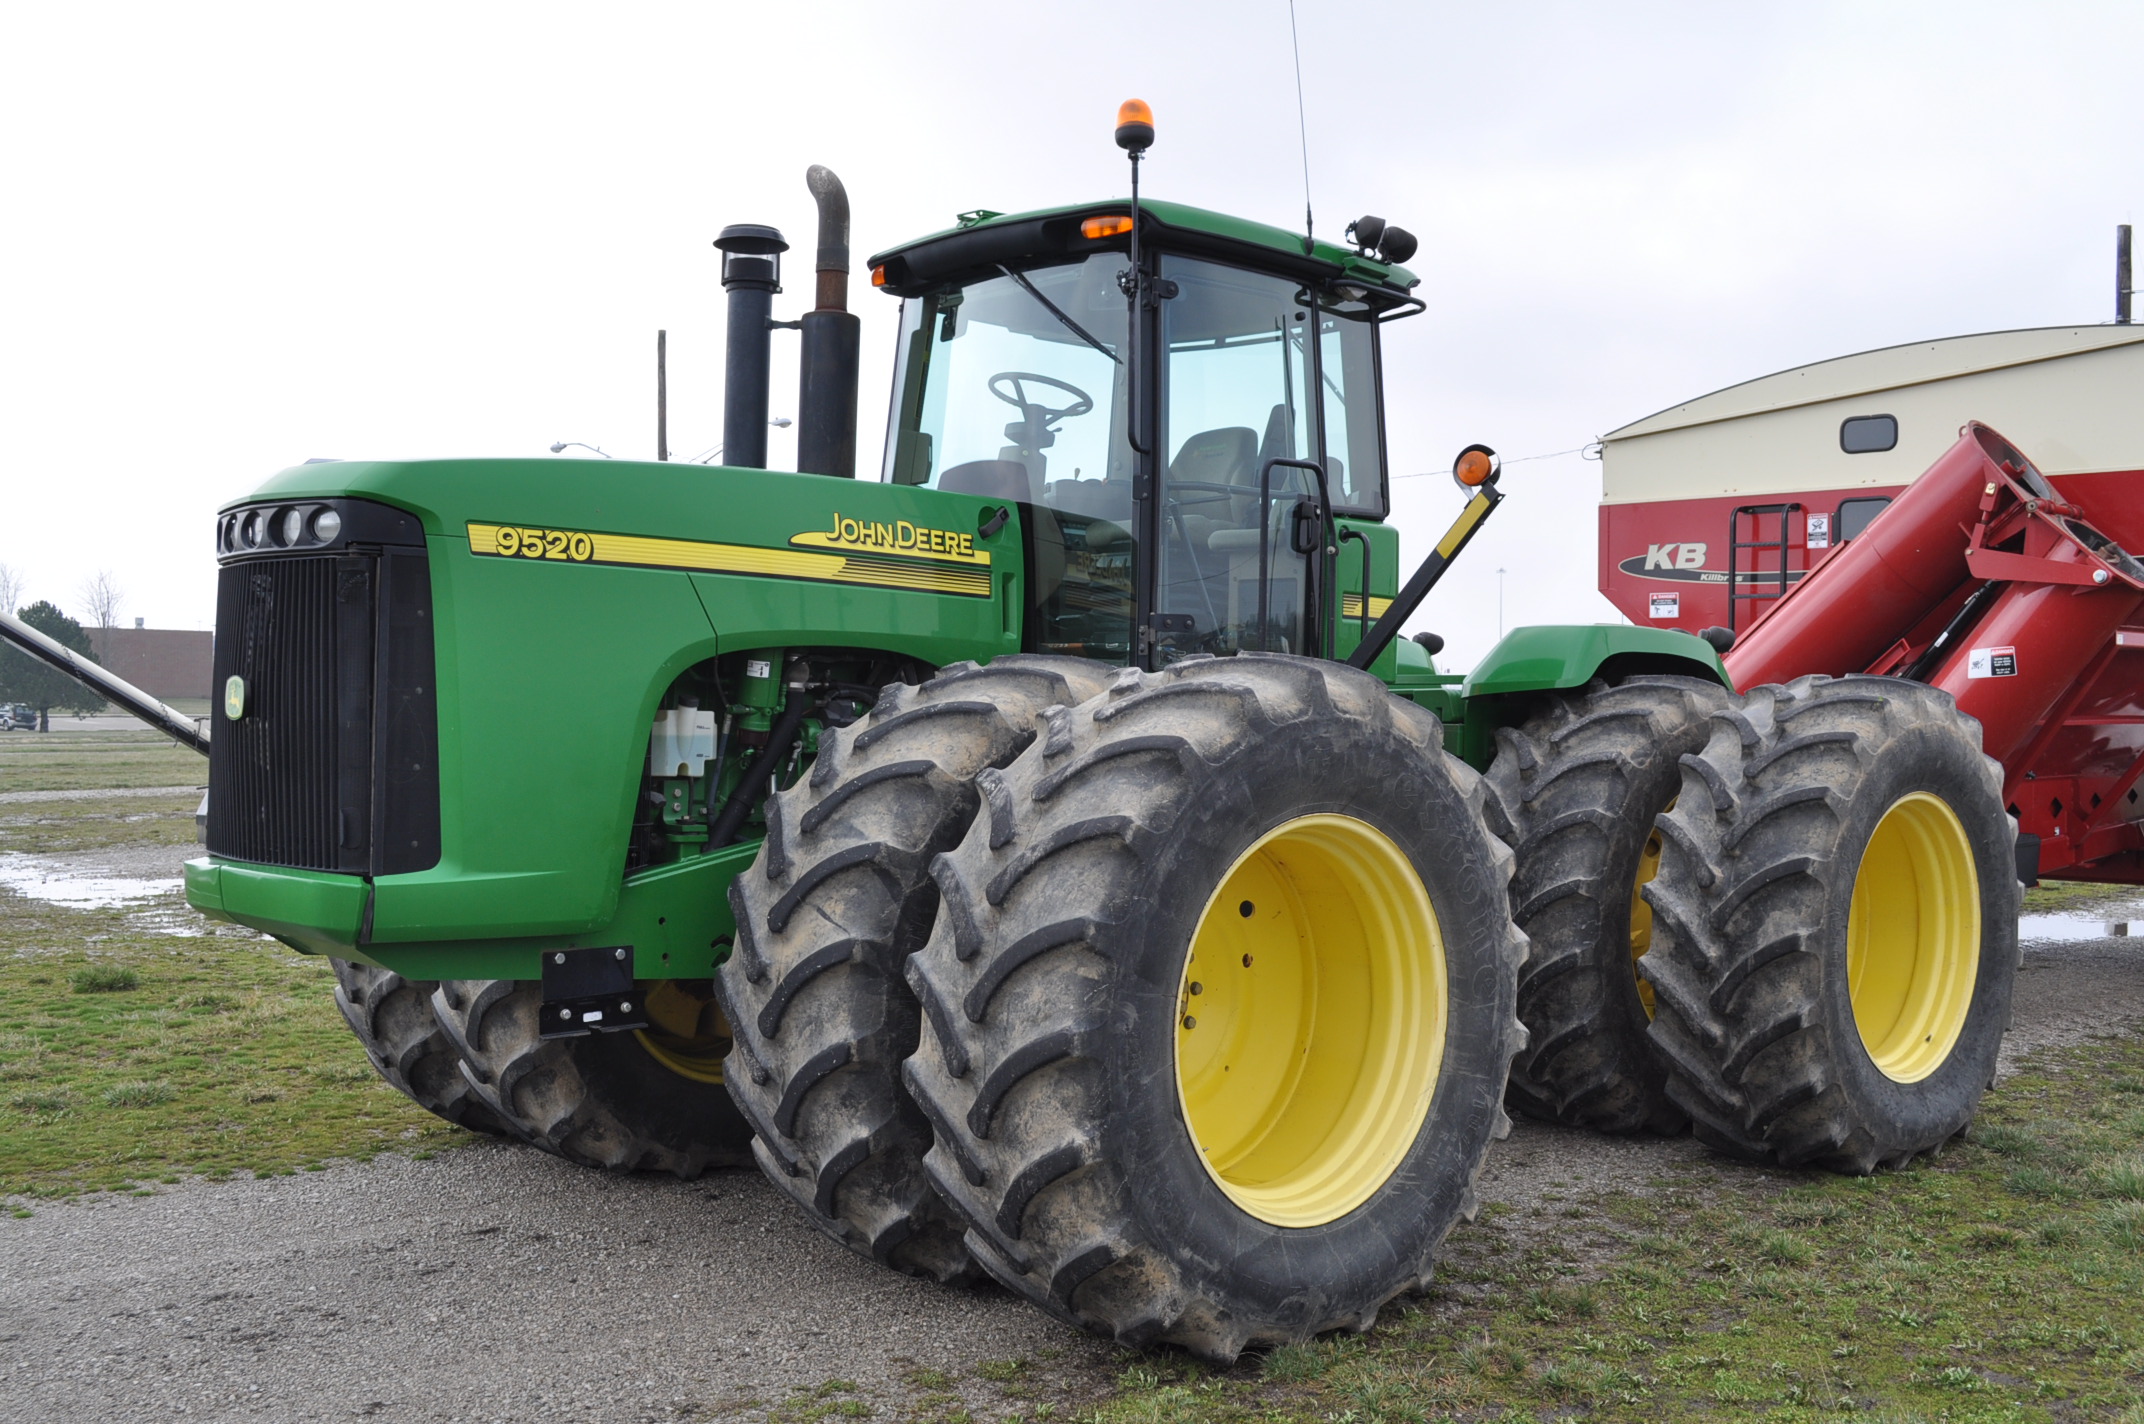 John Deere is on the winning side of history when it comes to the Right